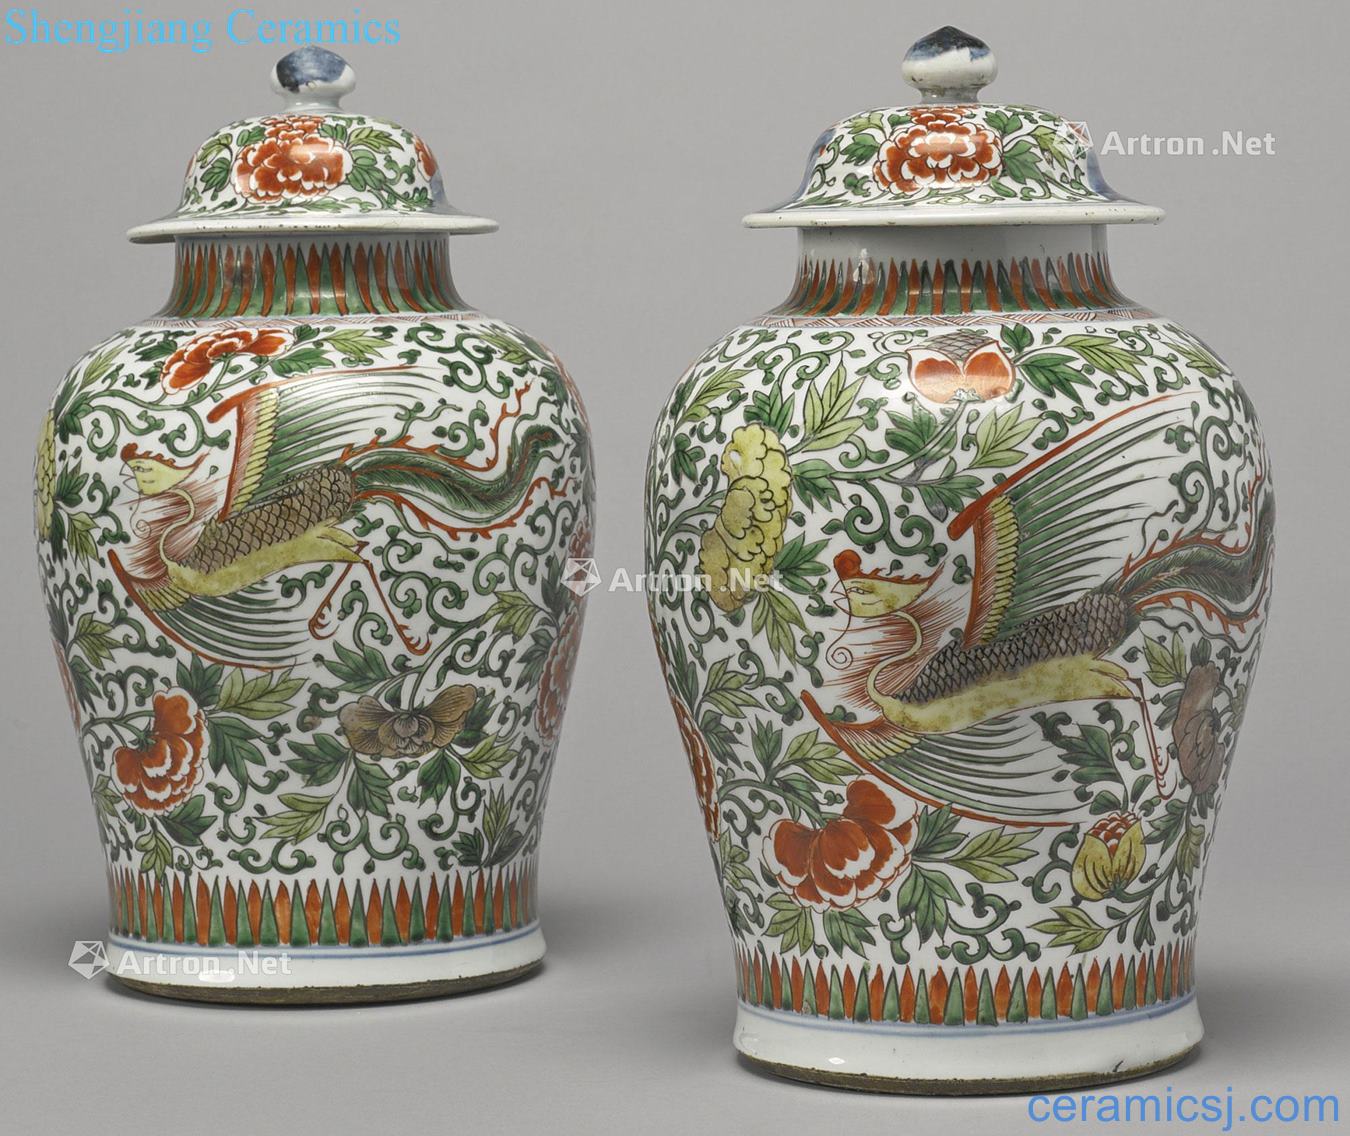 Qing dynasty in the 19th century Colorful phoenix grain cover tank (a)